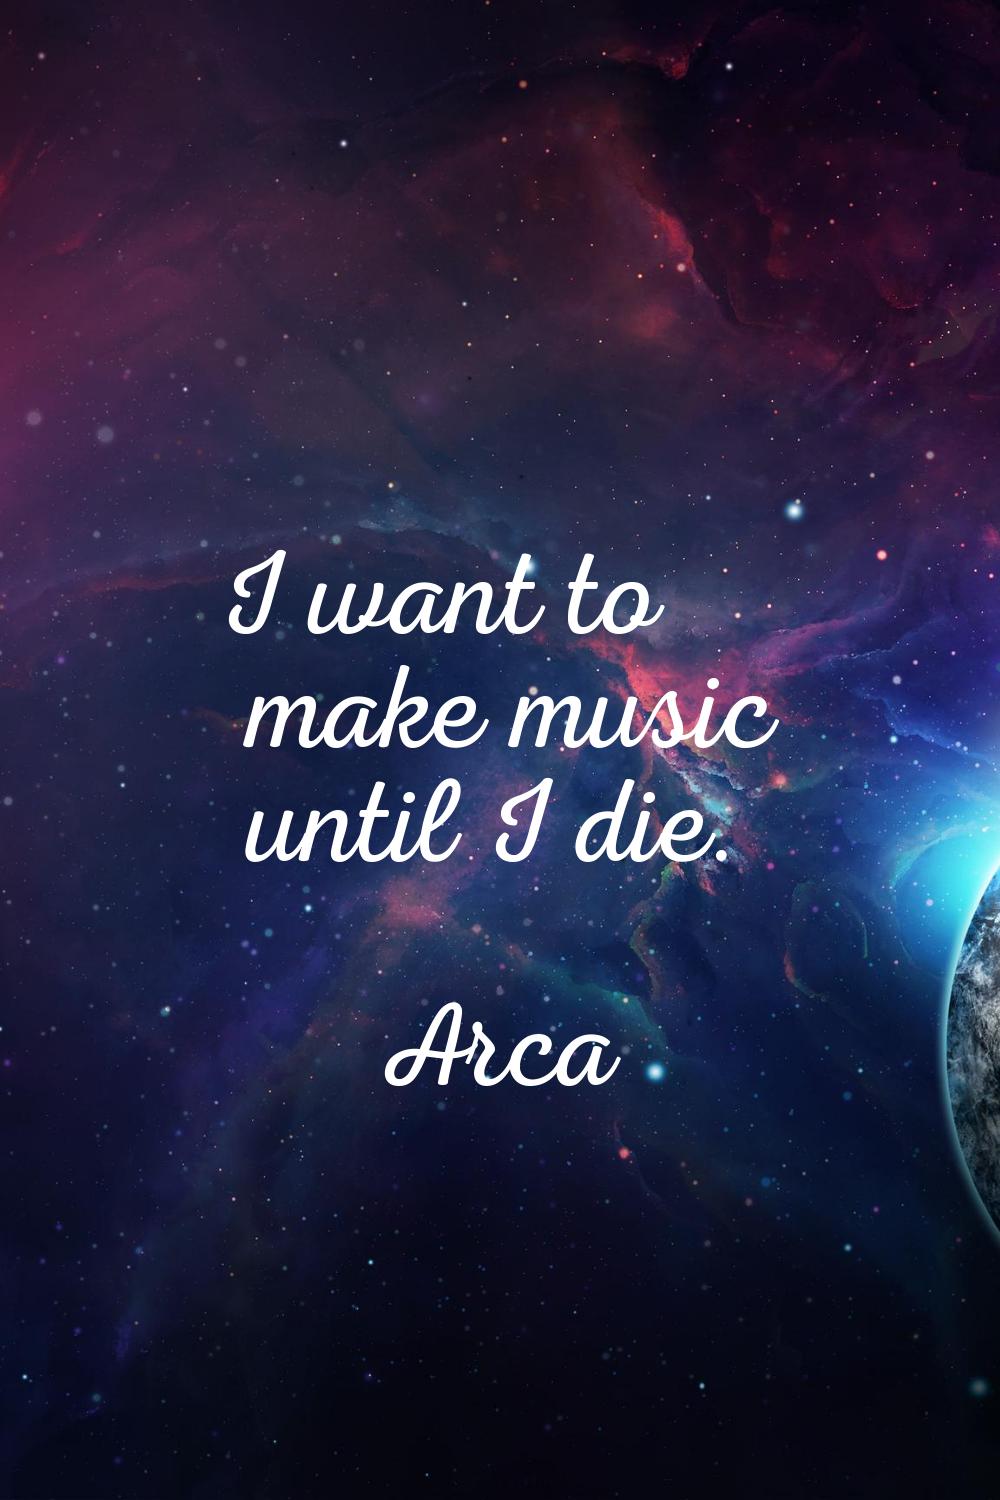 I want to make music until I die.